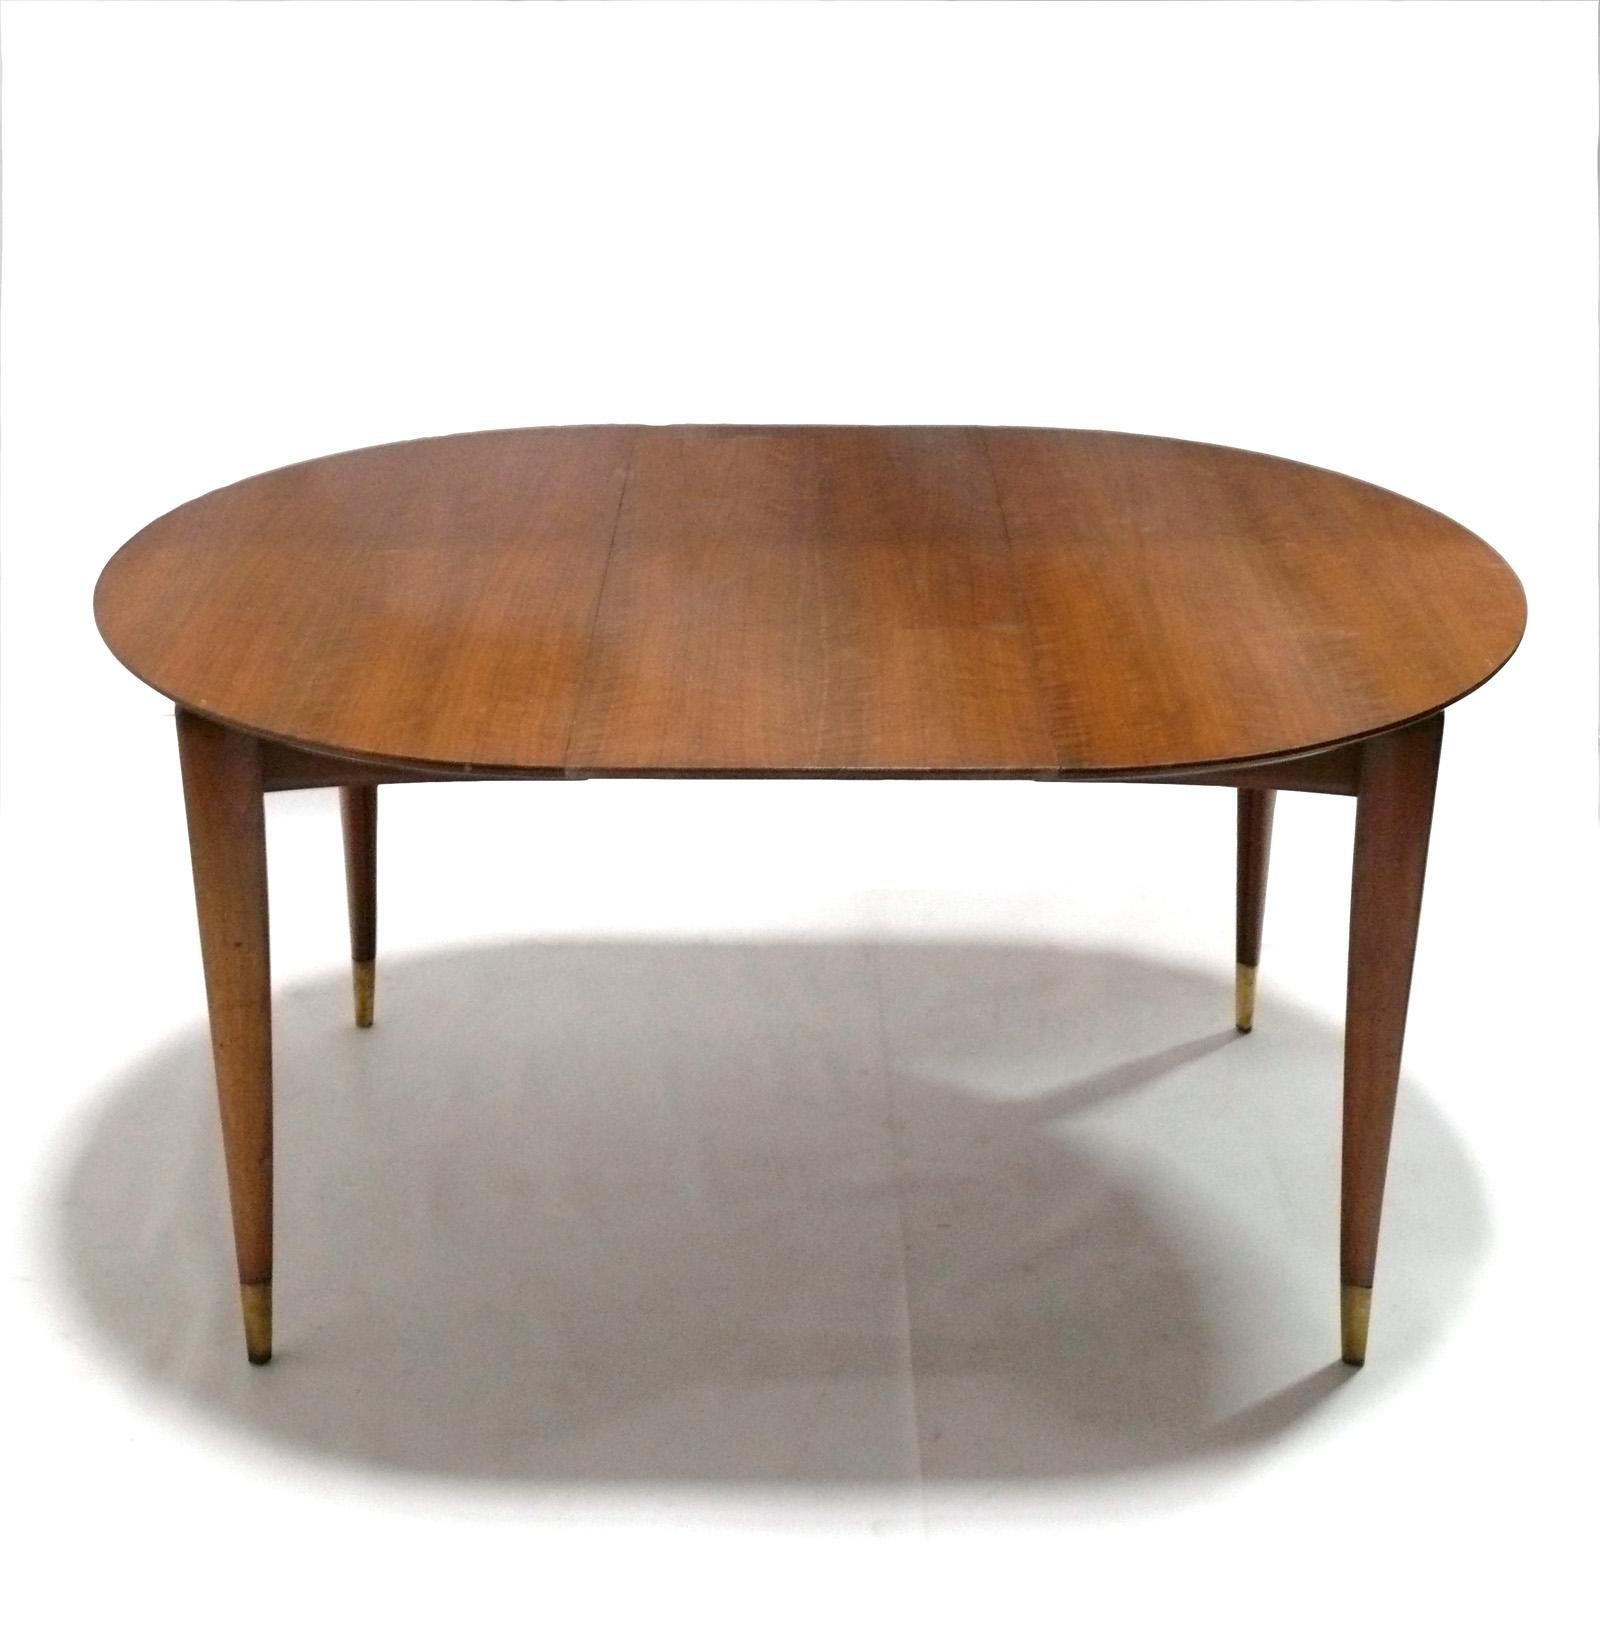 Mid-Century Modern Gio Ponti Dining Table for Singer and Sons Seats 4-6 Guests